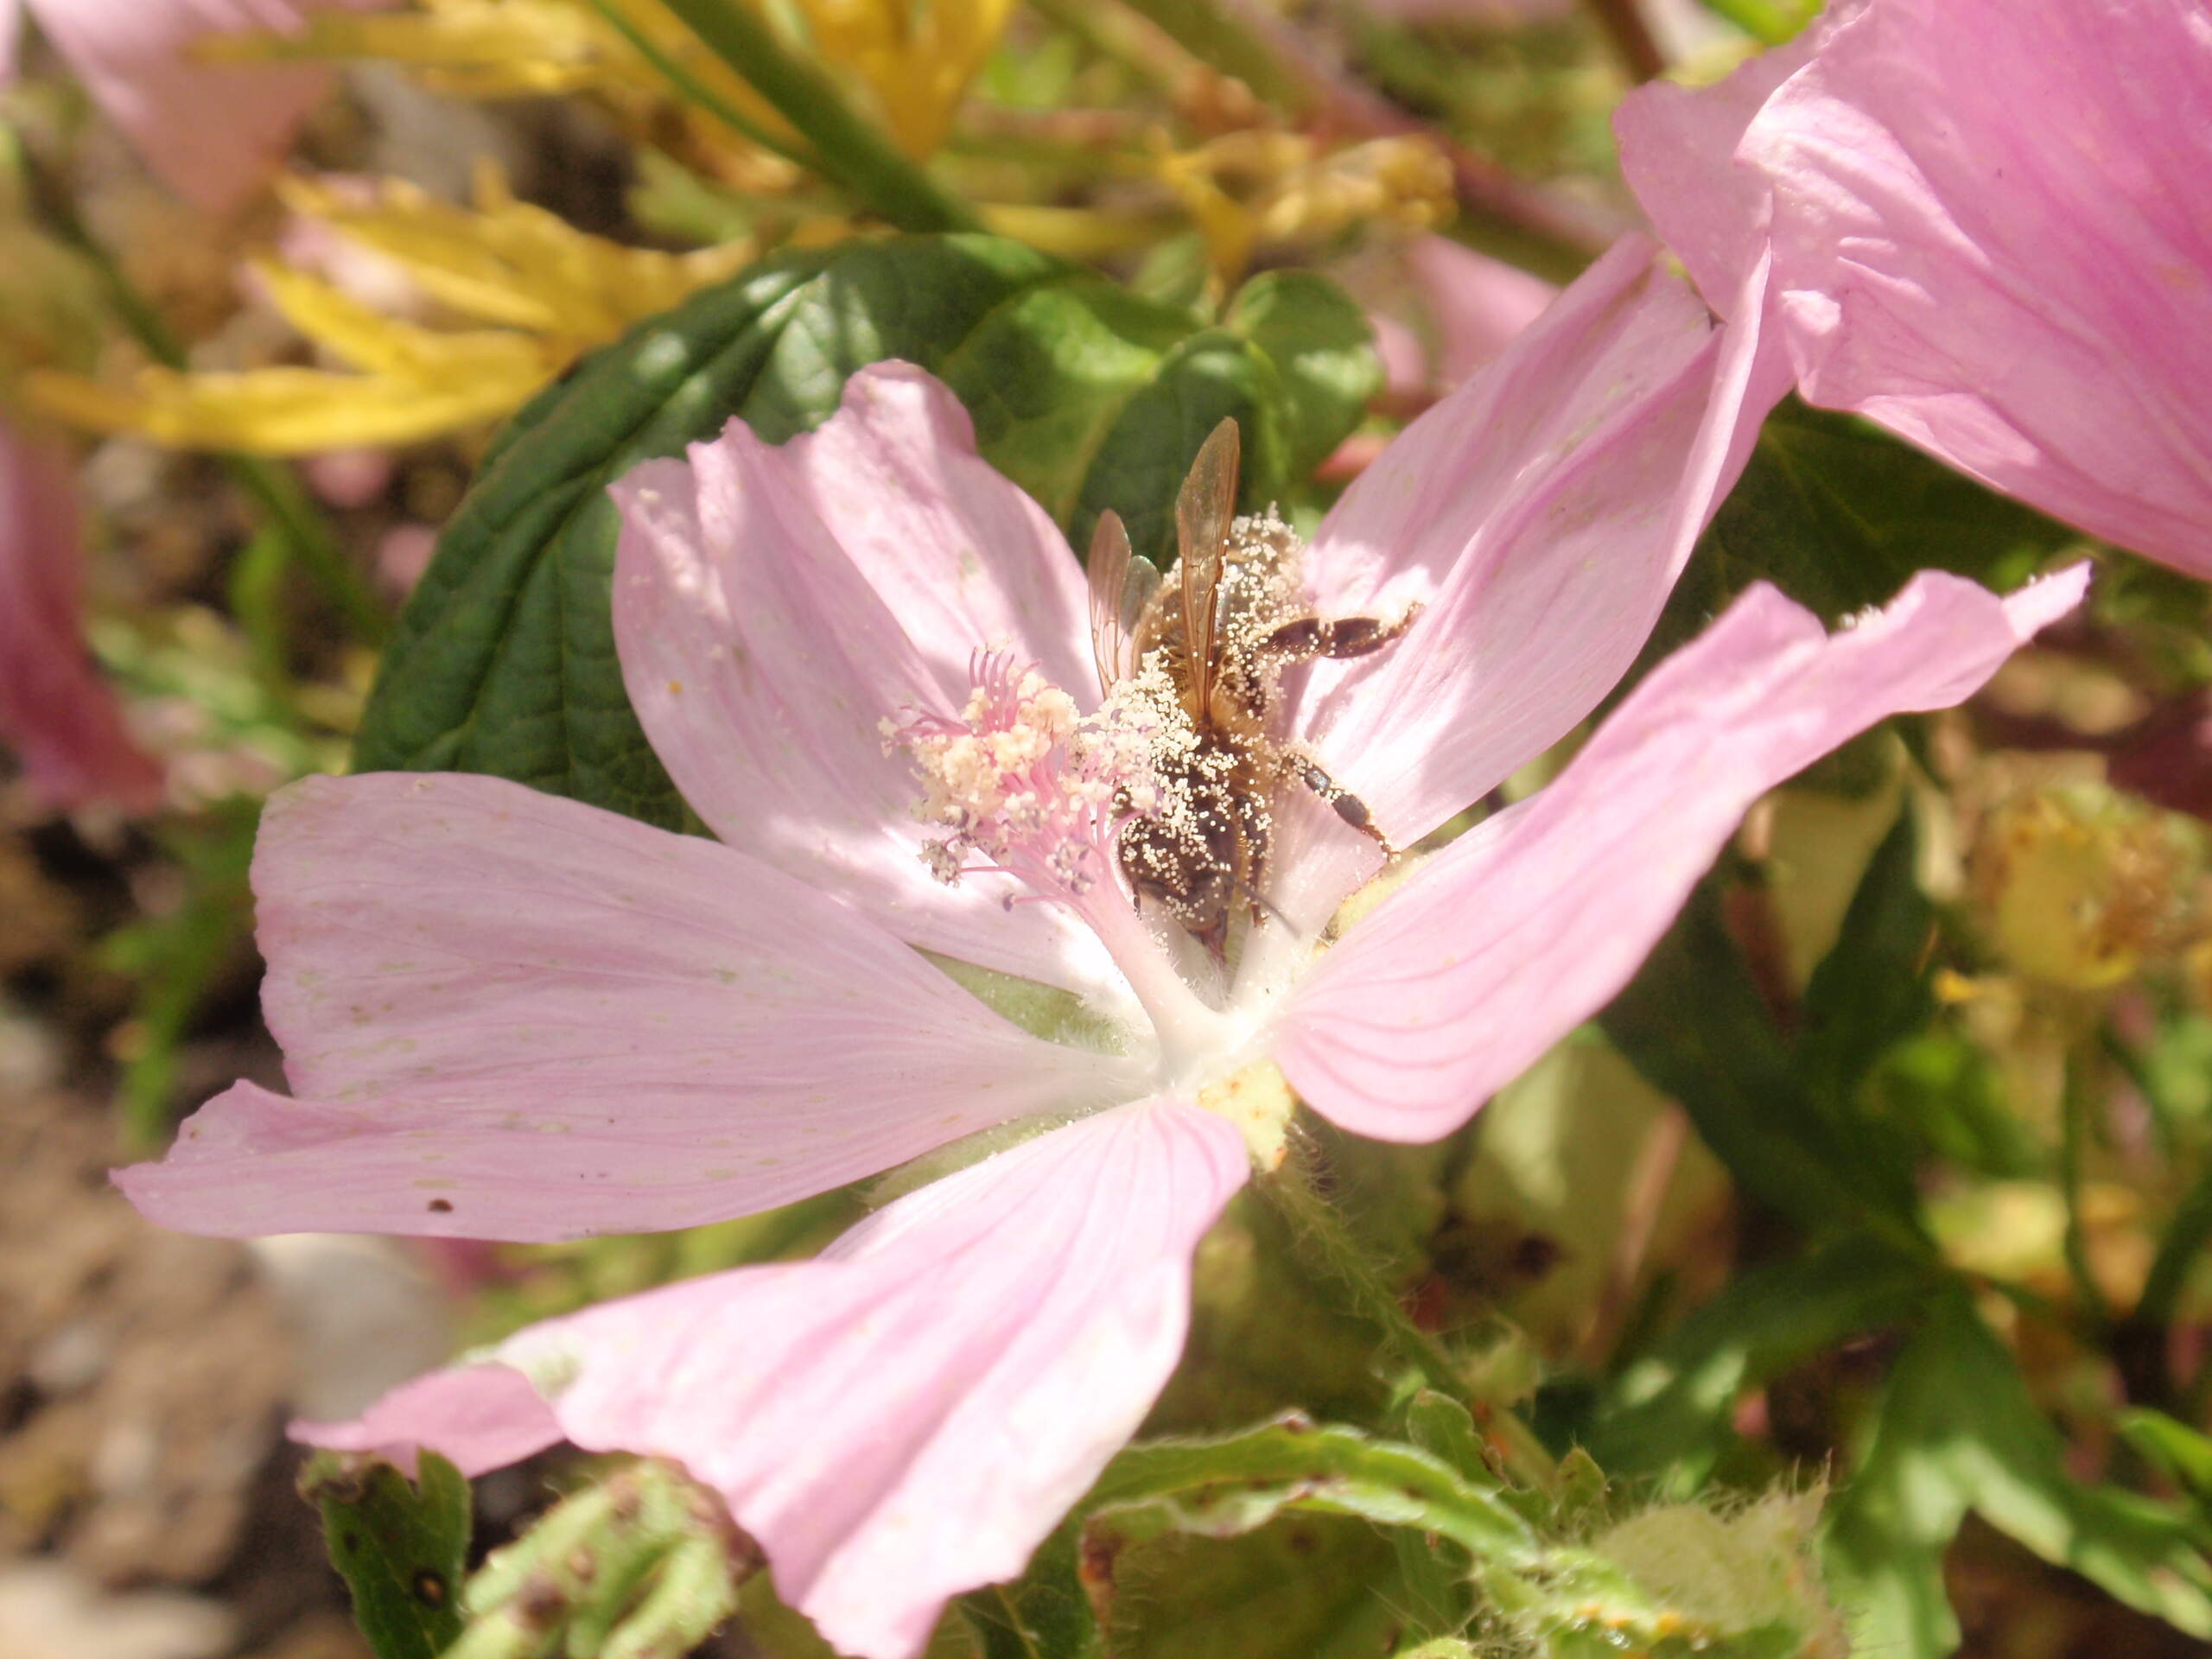 Musk and wood mallows produce a lot of white pollen